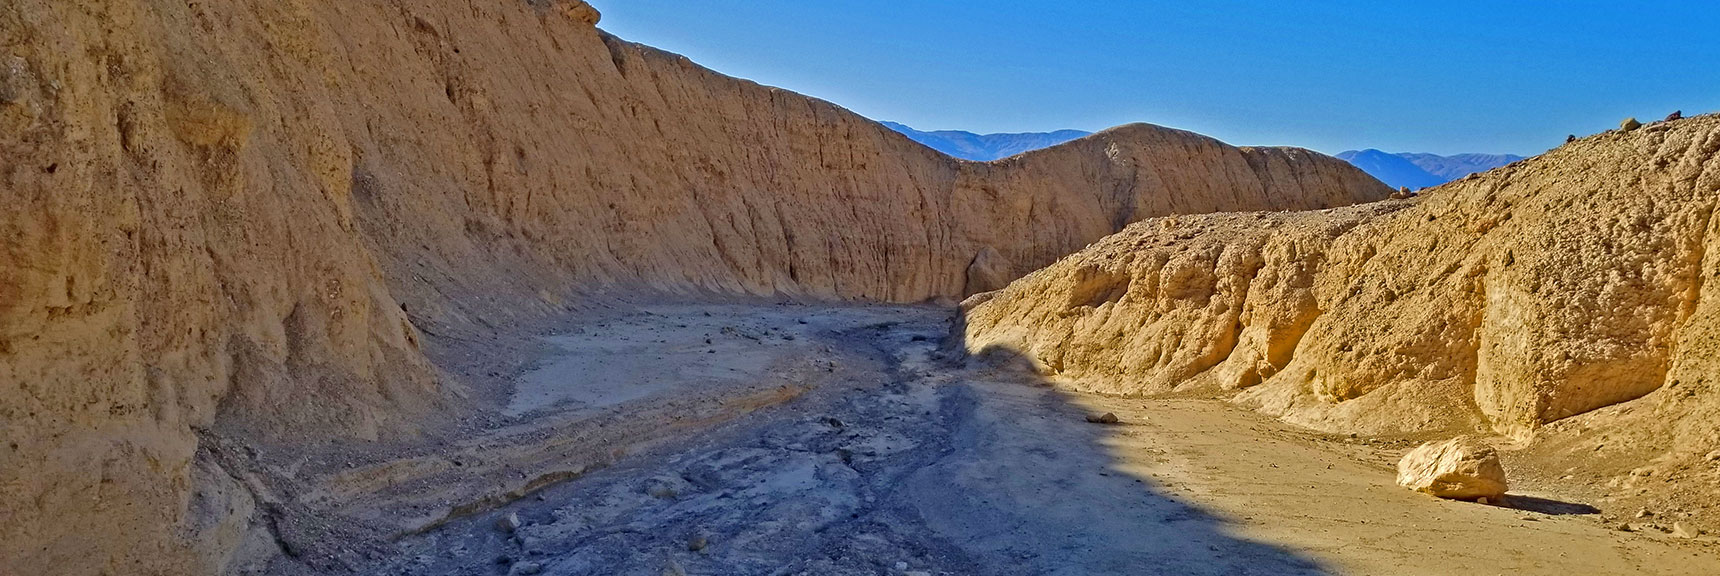 Heading Back Down the Canyon Toward Artist's Pallet | Artists Drive Hidden Canyon Hikes | Death Valley National Park, California